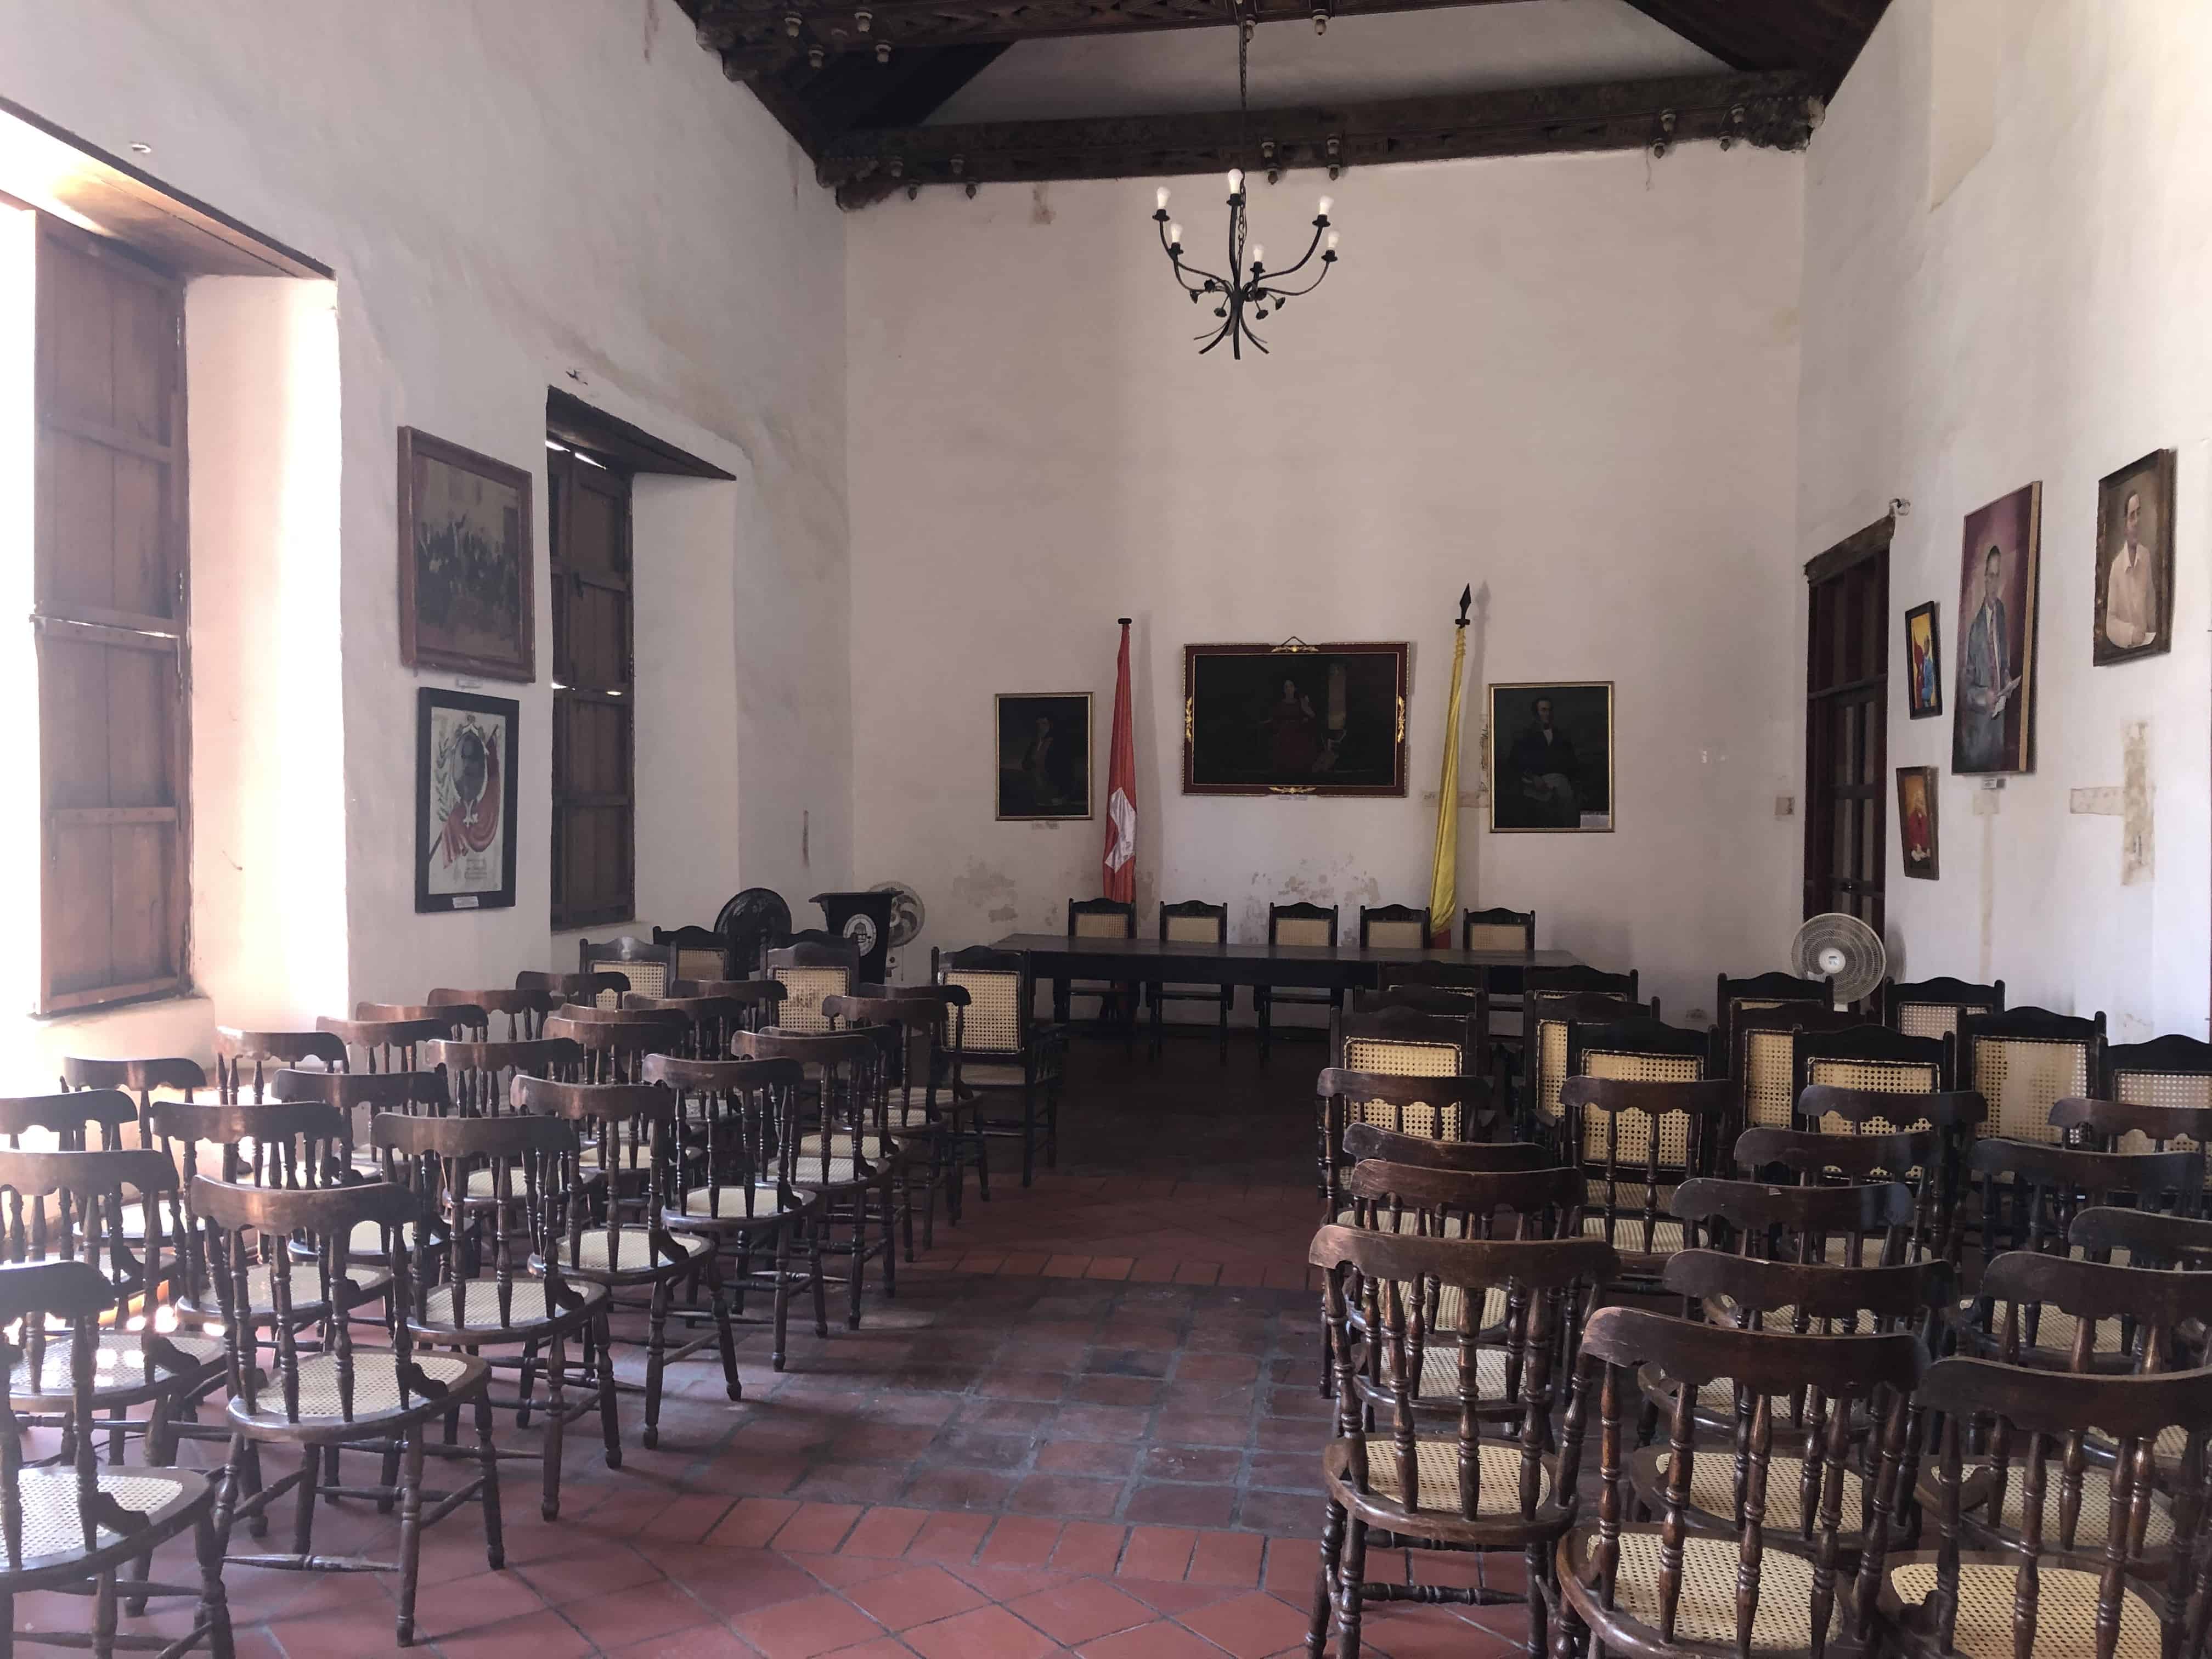 Meeting room in the Cultural Center of Mompox, Bolívar, Colombia